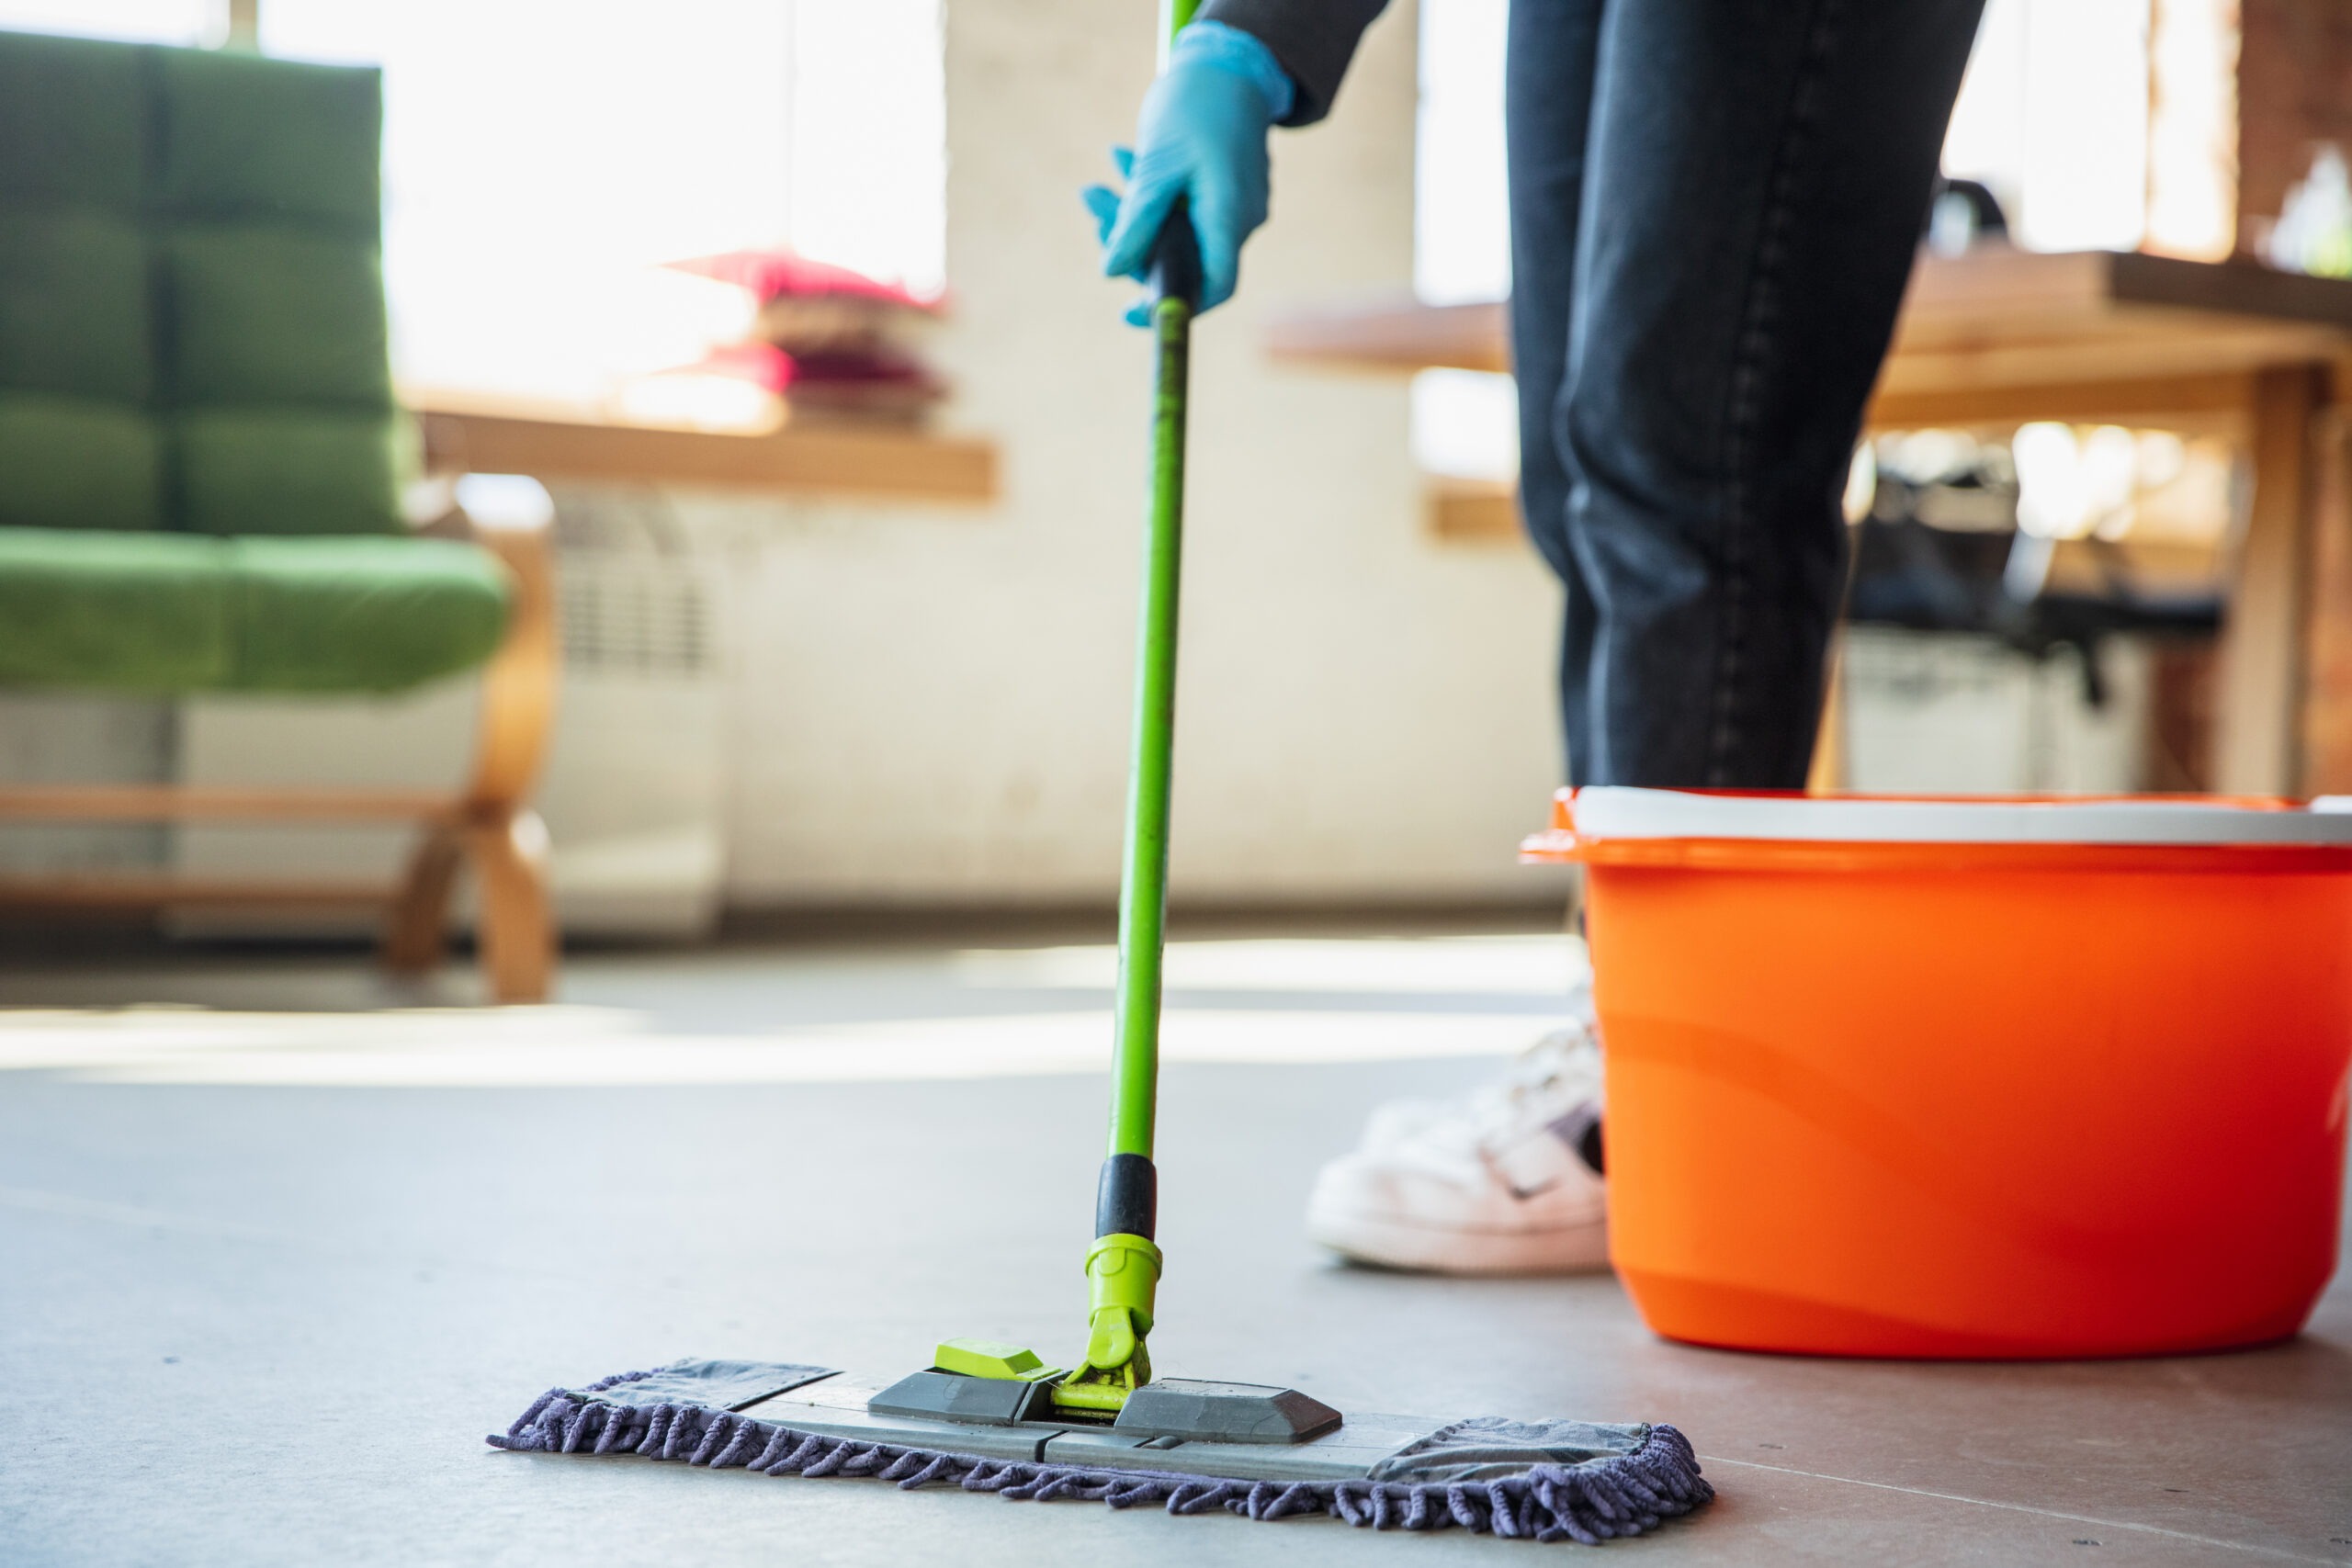 ndis funded cleaning service